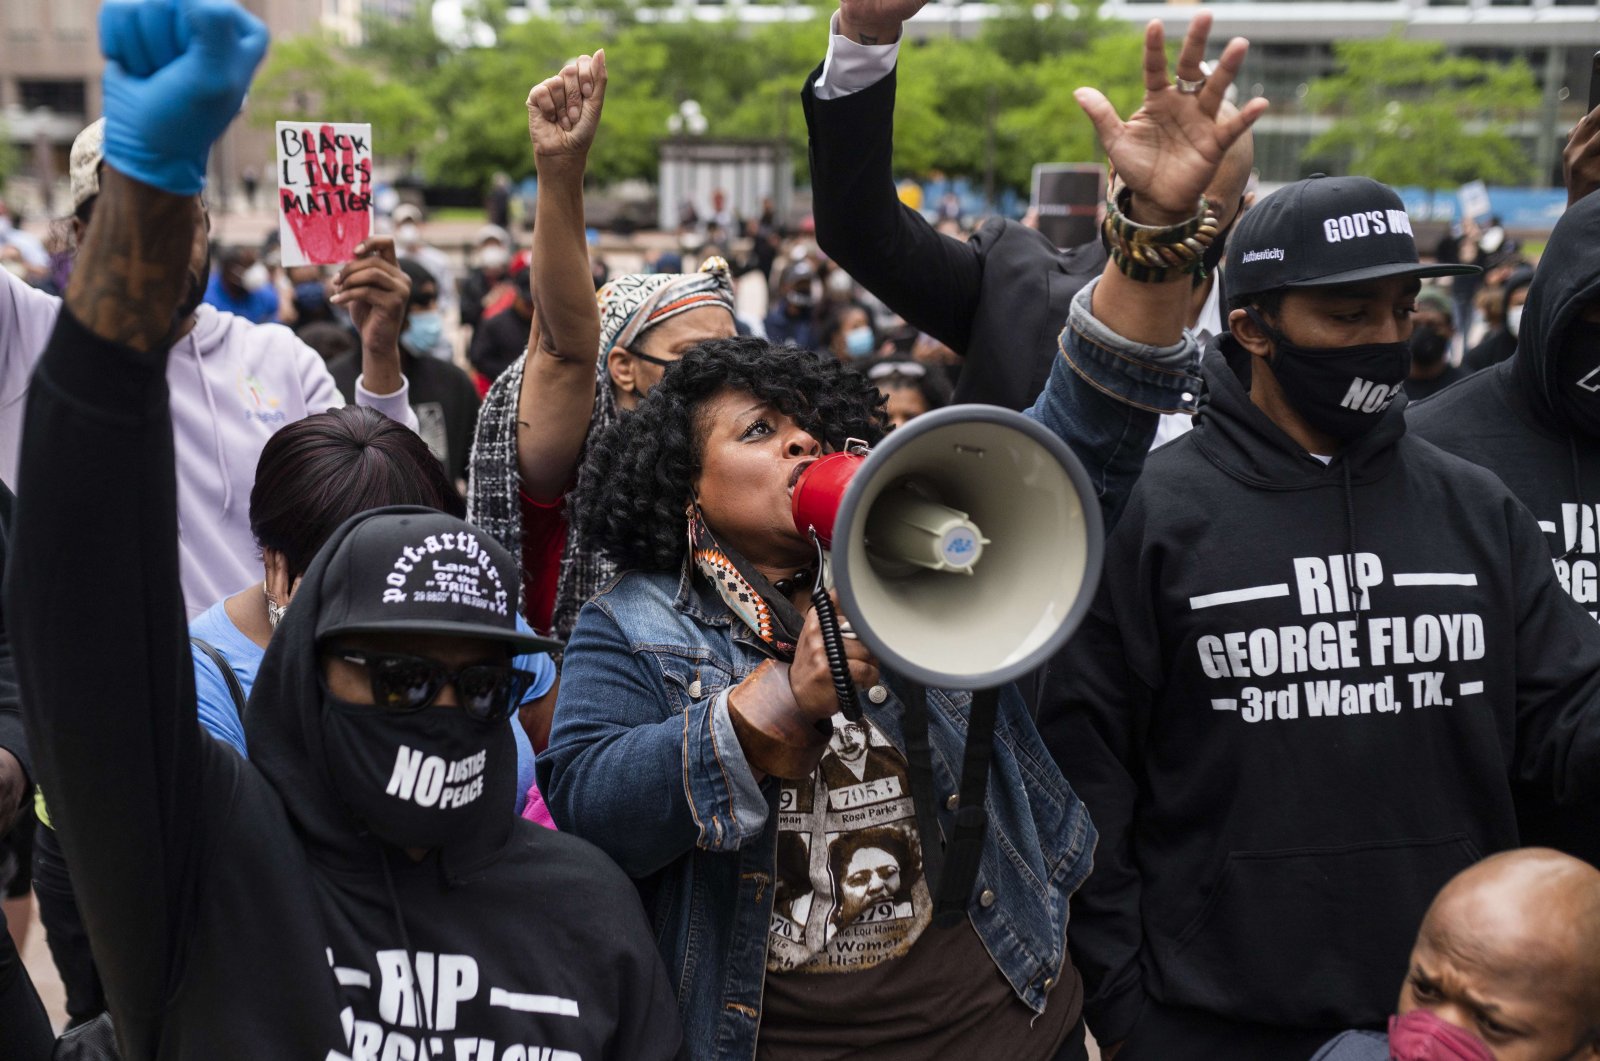 Jamela J. Pettiford sings during a protest with Former NBA player Stephen Jackson in response to the police killing of George Floyd outside the Hennepin County Government Center on May 29, 2020 in Minneapolis, Minn. (AFP Photo)